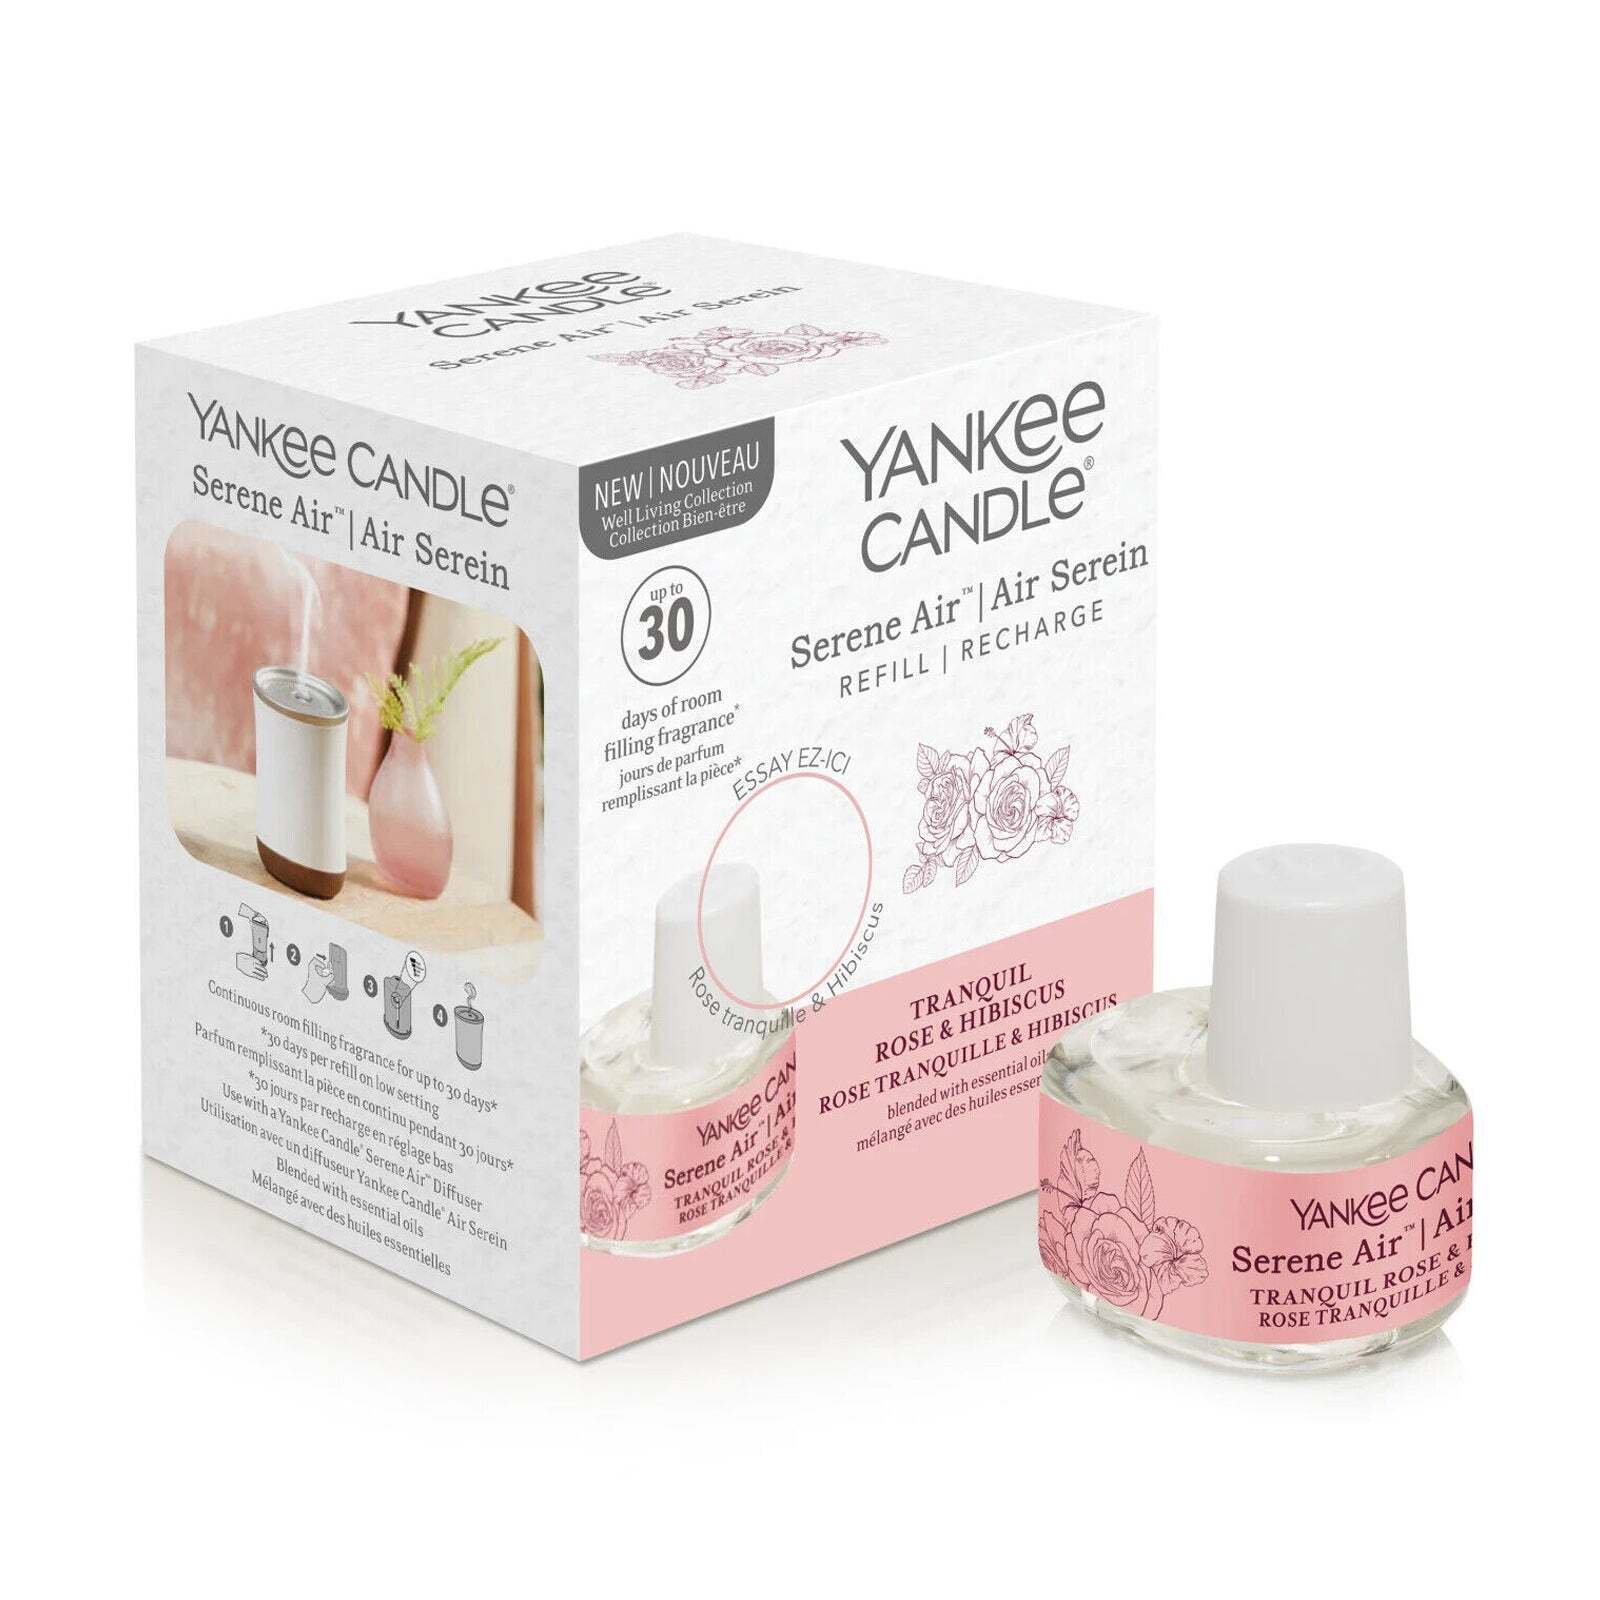 Yankee Candle Tranquil Rose & Hibiscus Essential Oil x 20